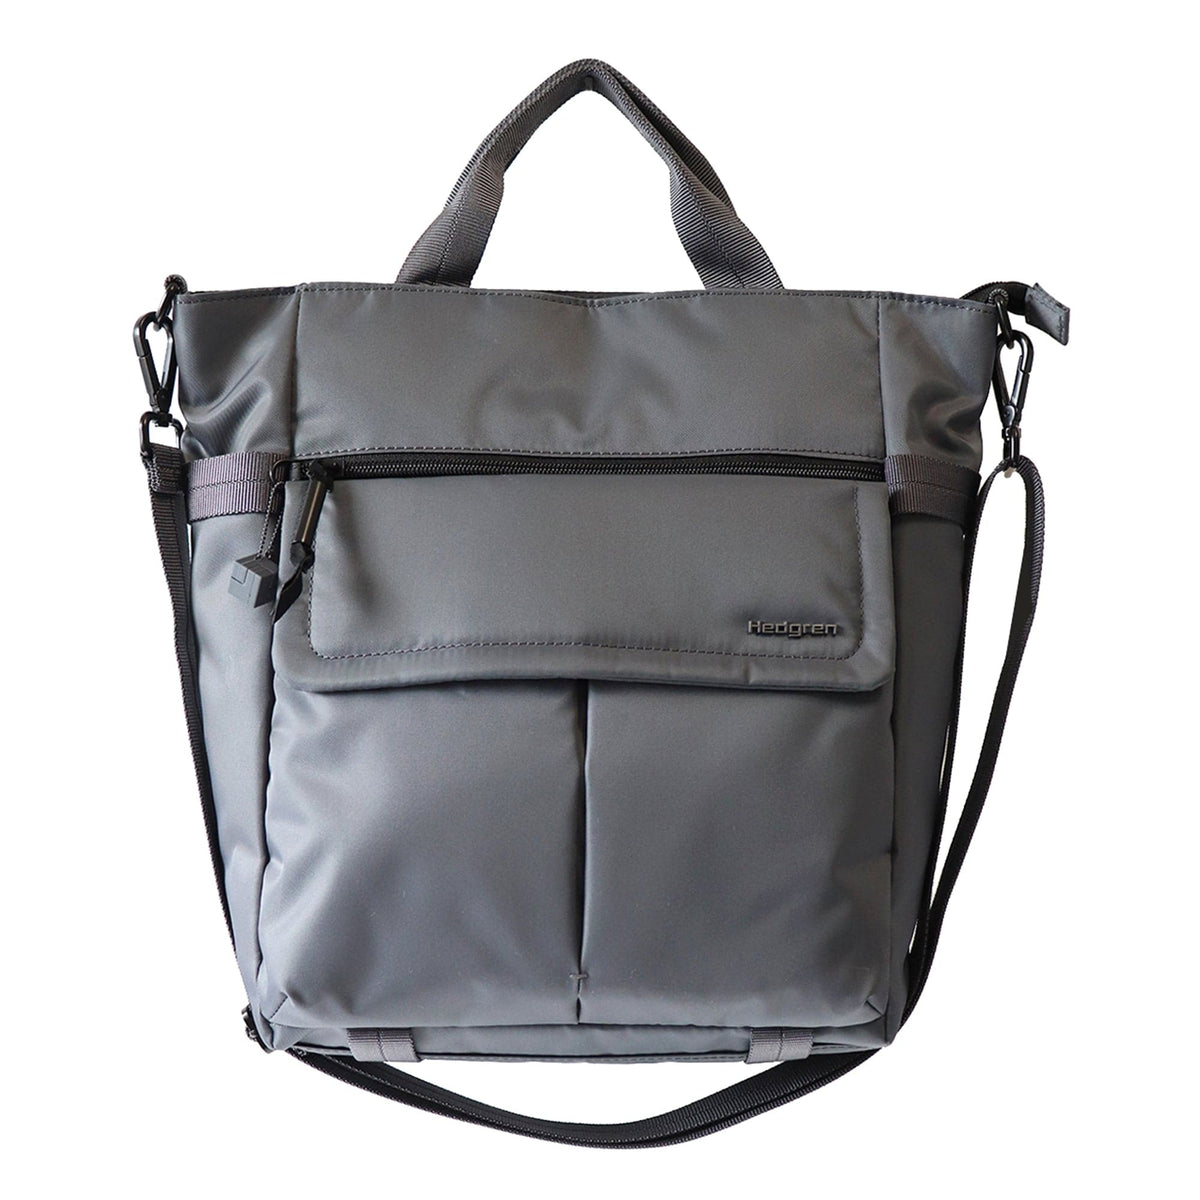 Hedgren Gracie Sustainably Made Tote Bag